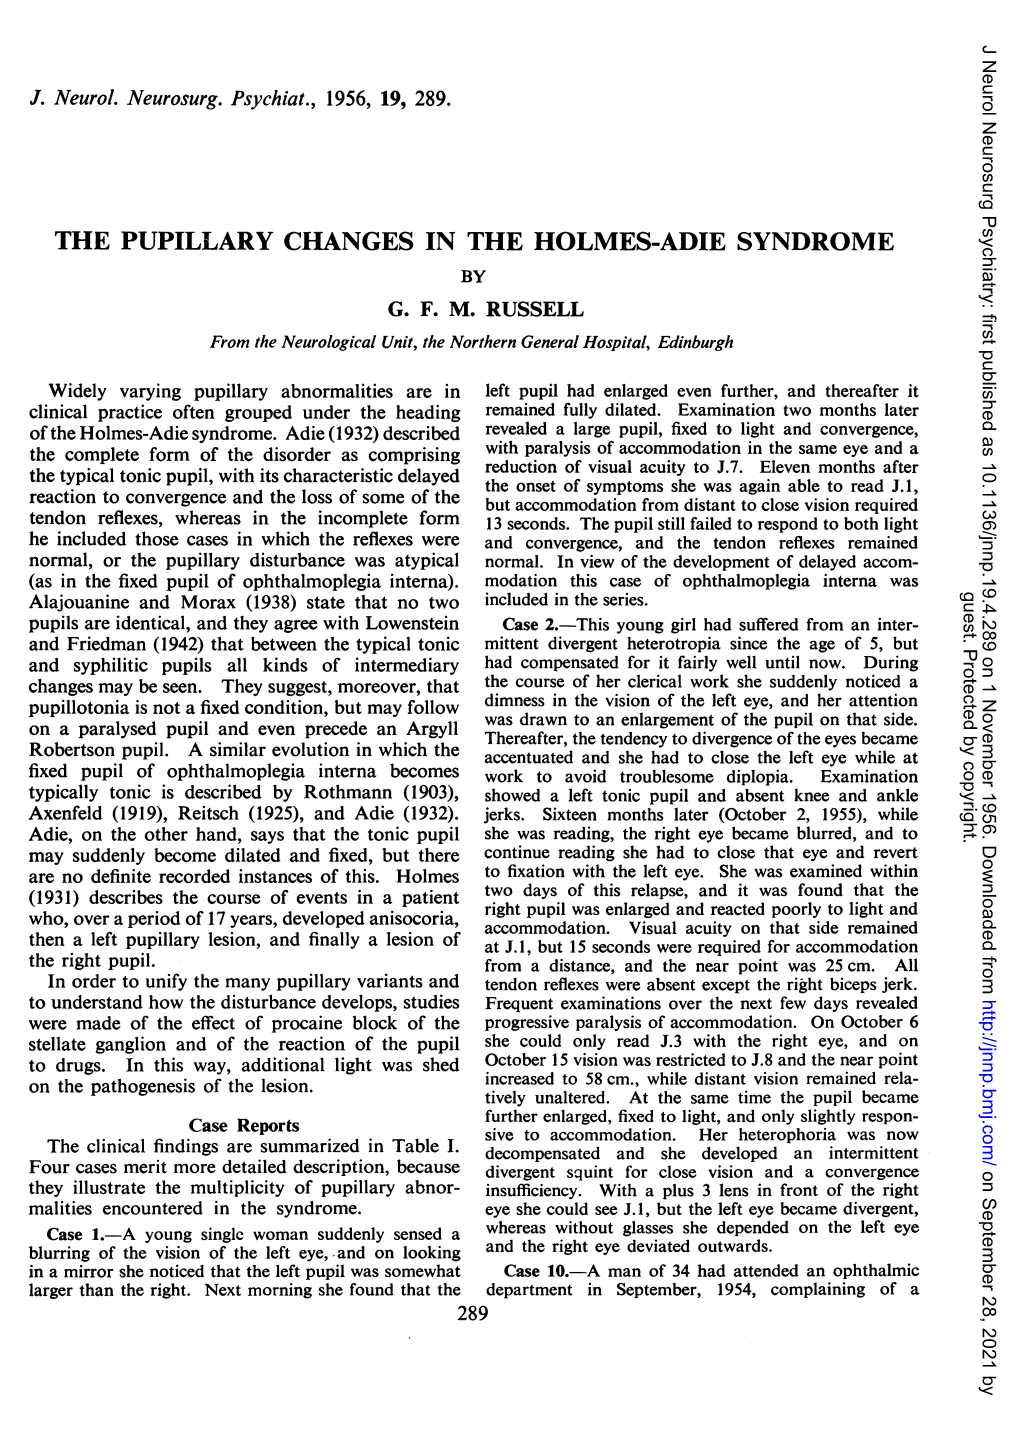 The Pupillary Changes in the Holmes-Adie Syndrome by G